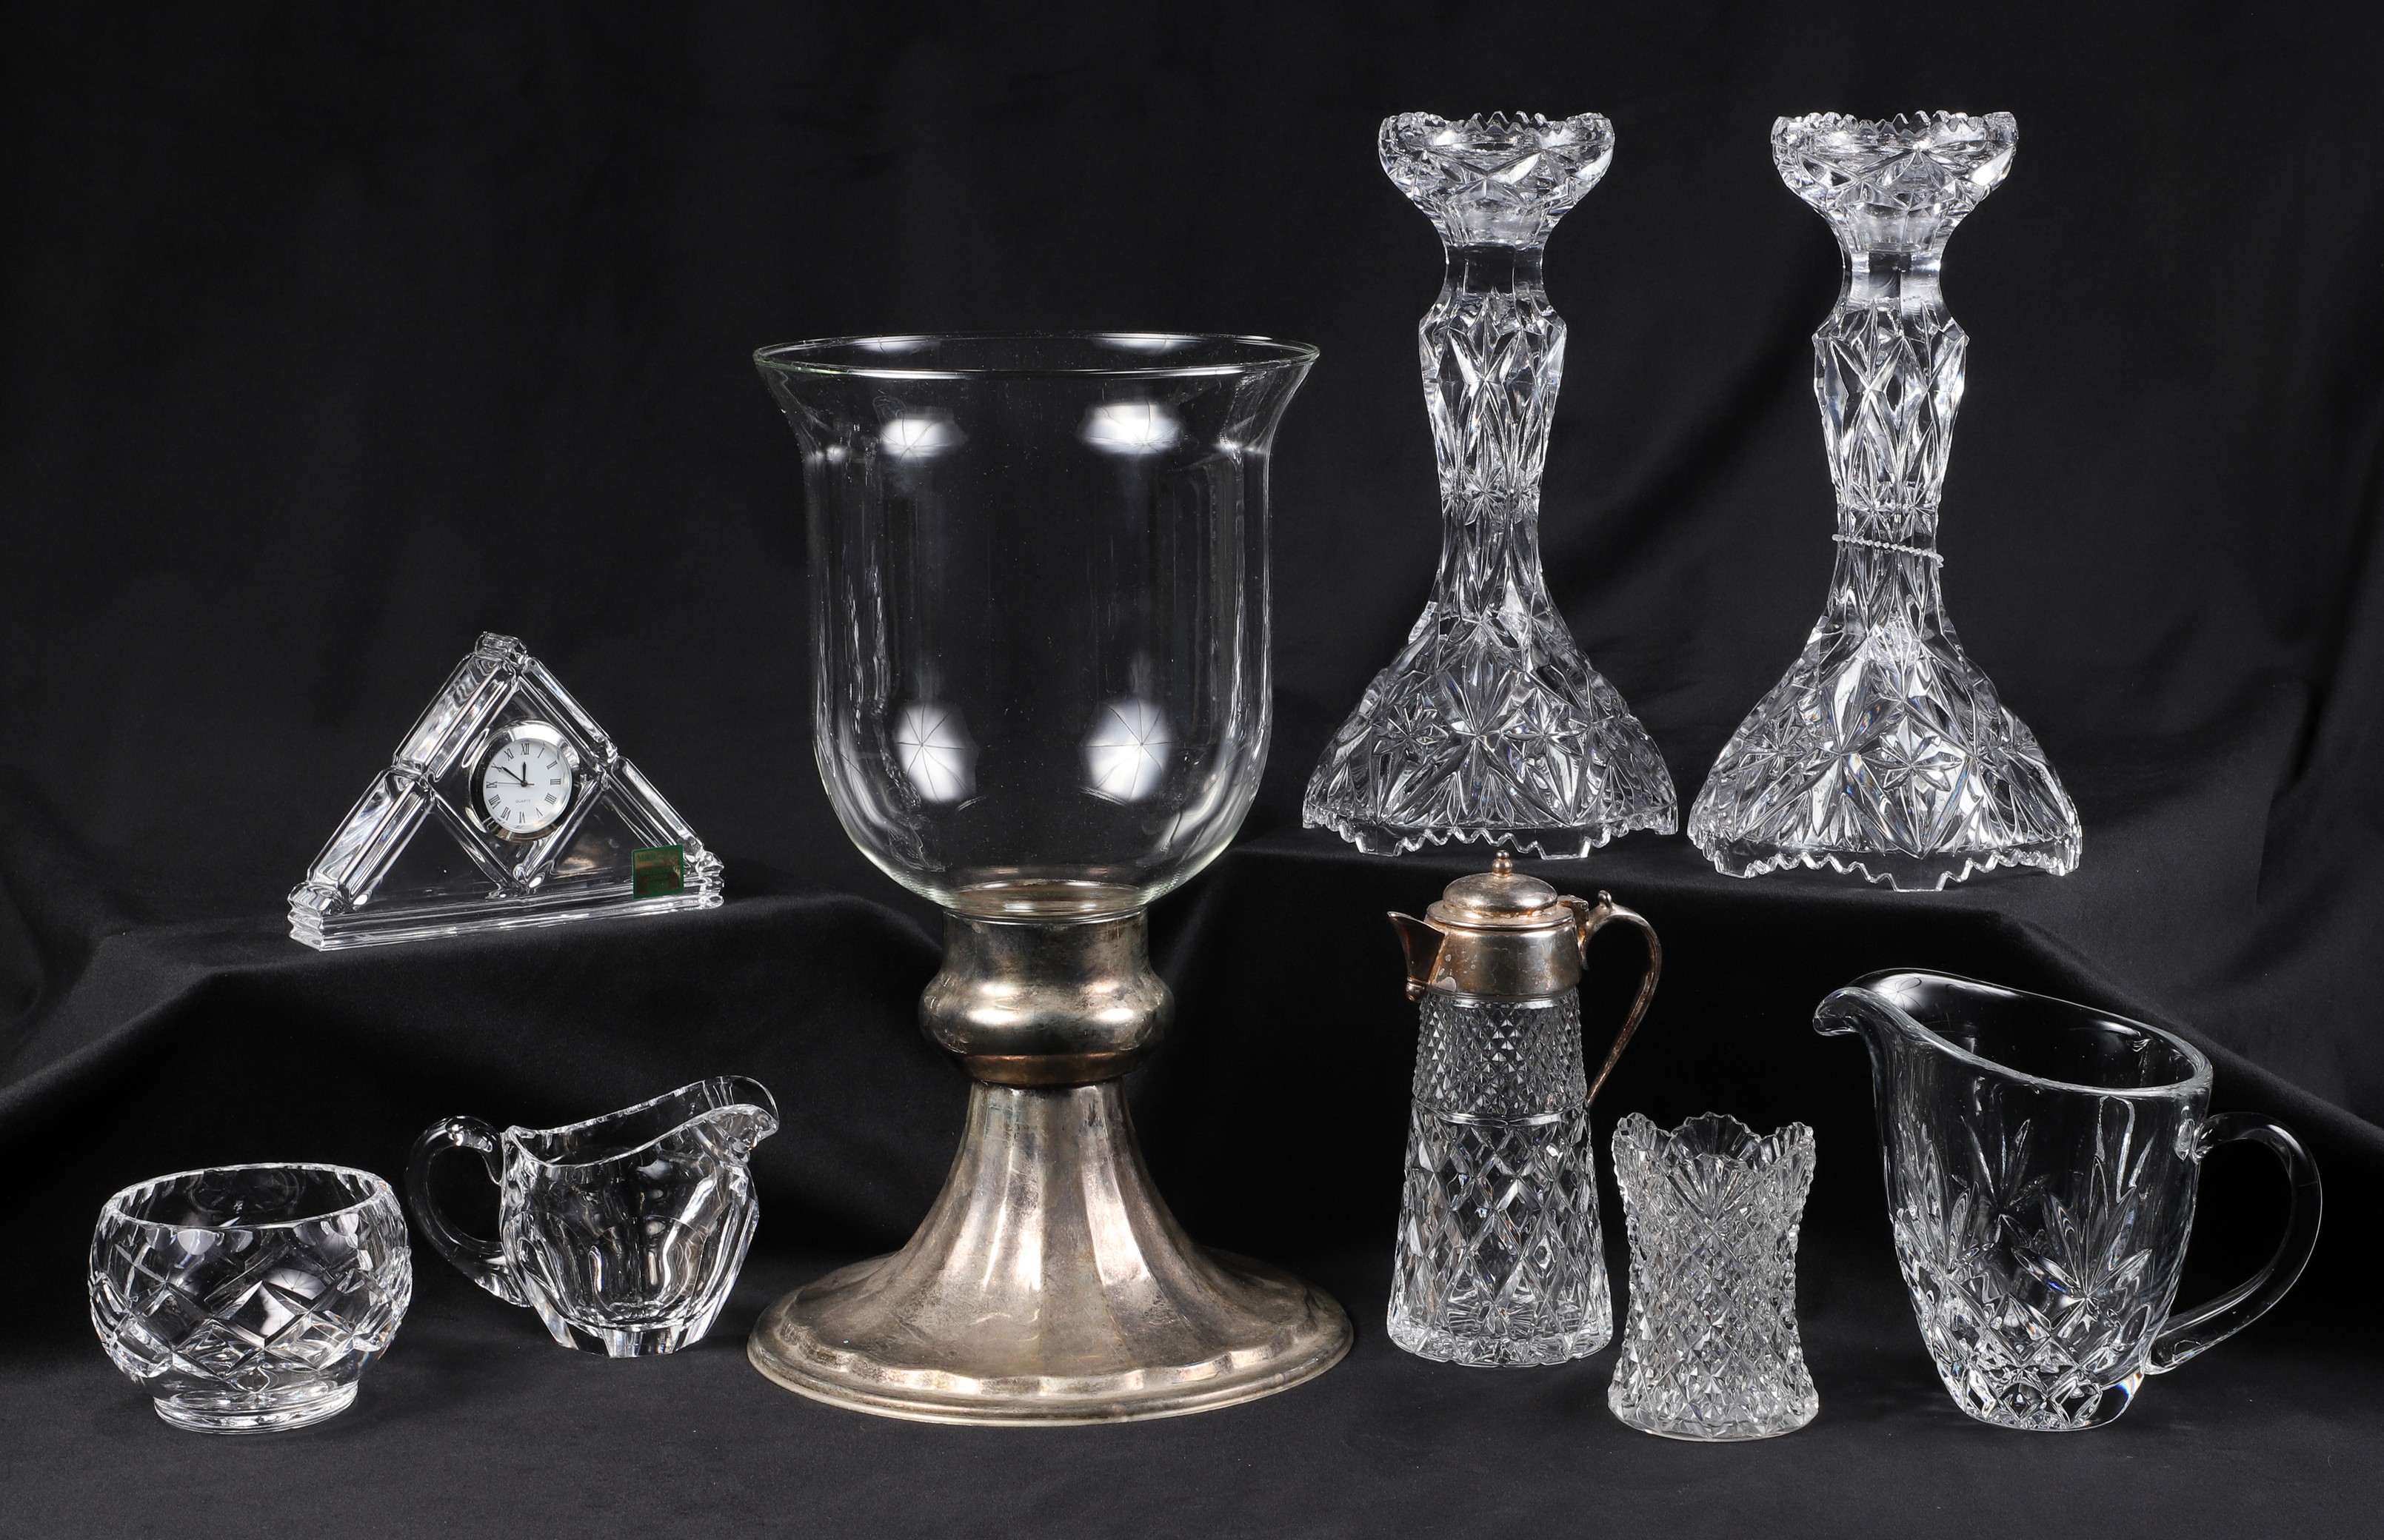 Glass and silver plate grouping